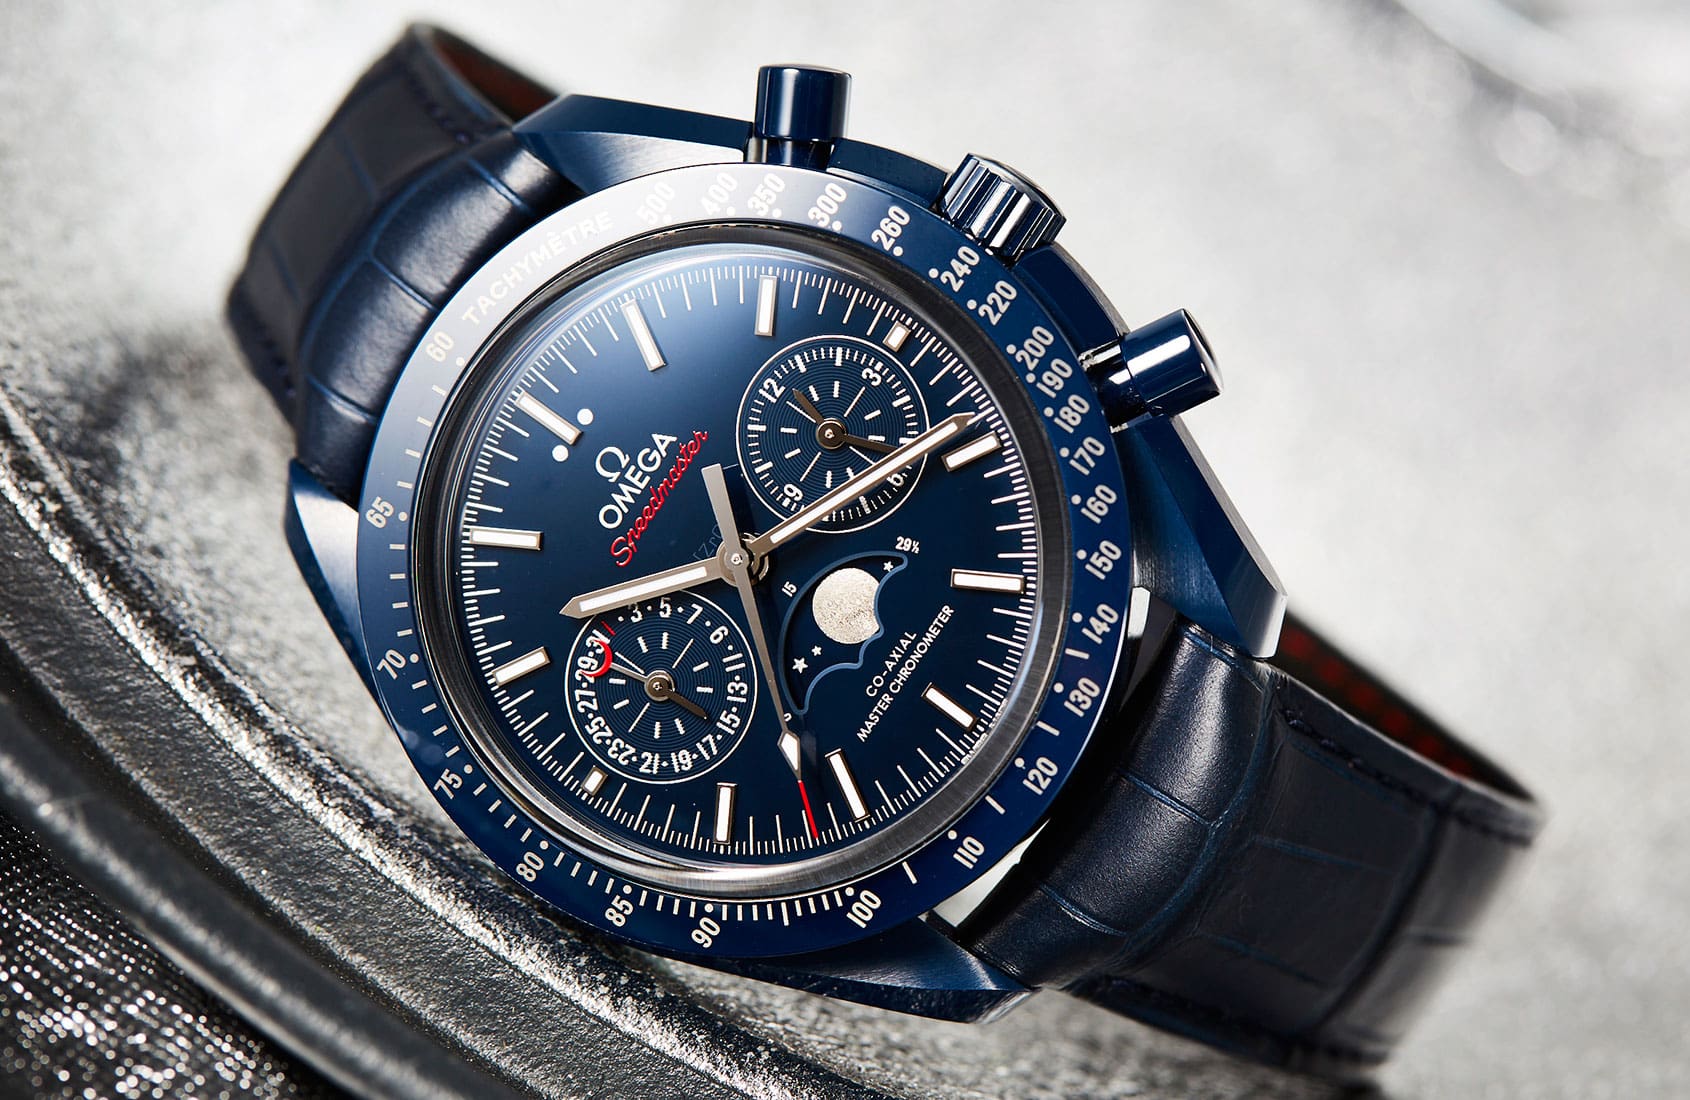 Taking a closer look at the Omega Co‑Axial Master Chronometer Moonphase Chronograph – Blue Side Of The Moon